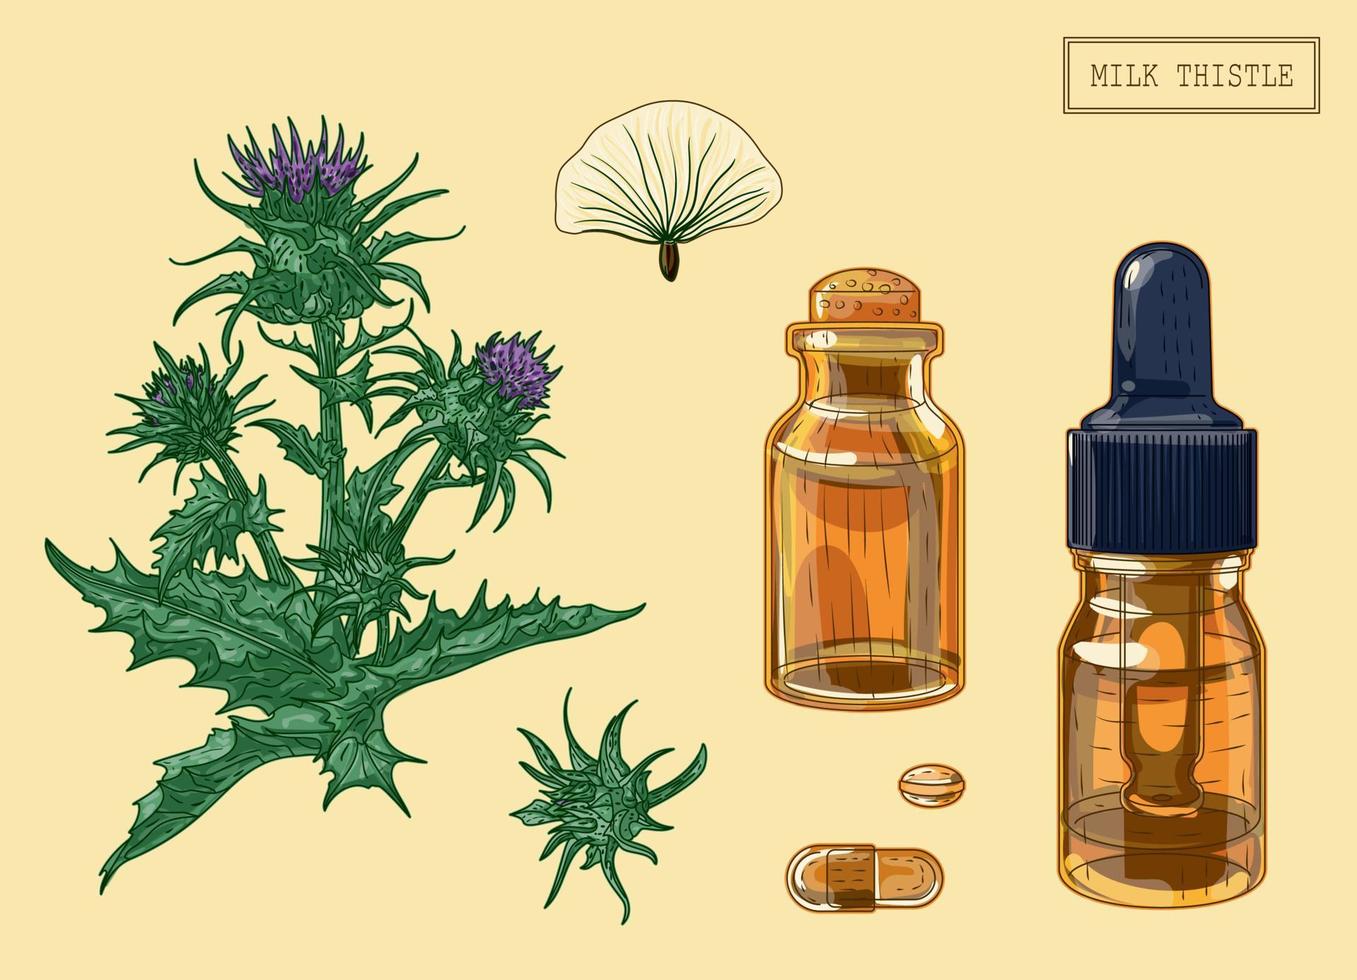 Medical Milk Thistle branch and vials, hand drawn illustration in a retro style vector